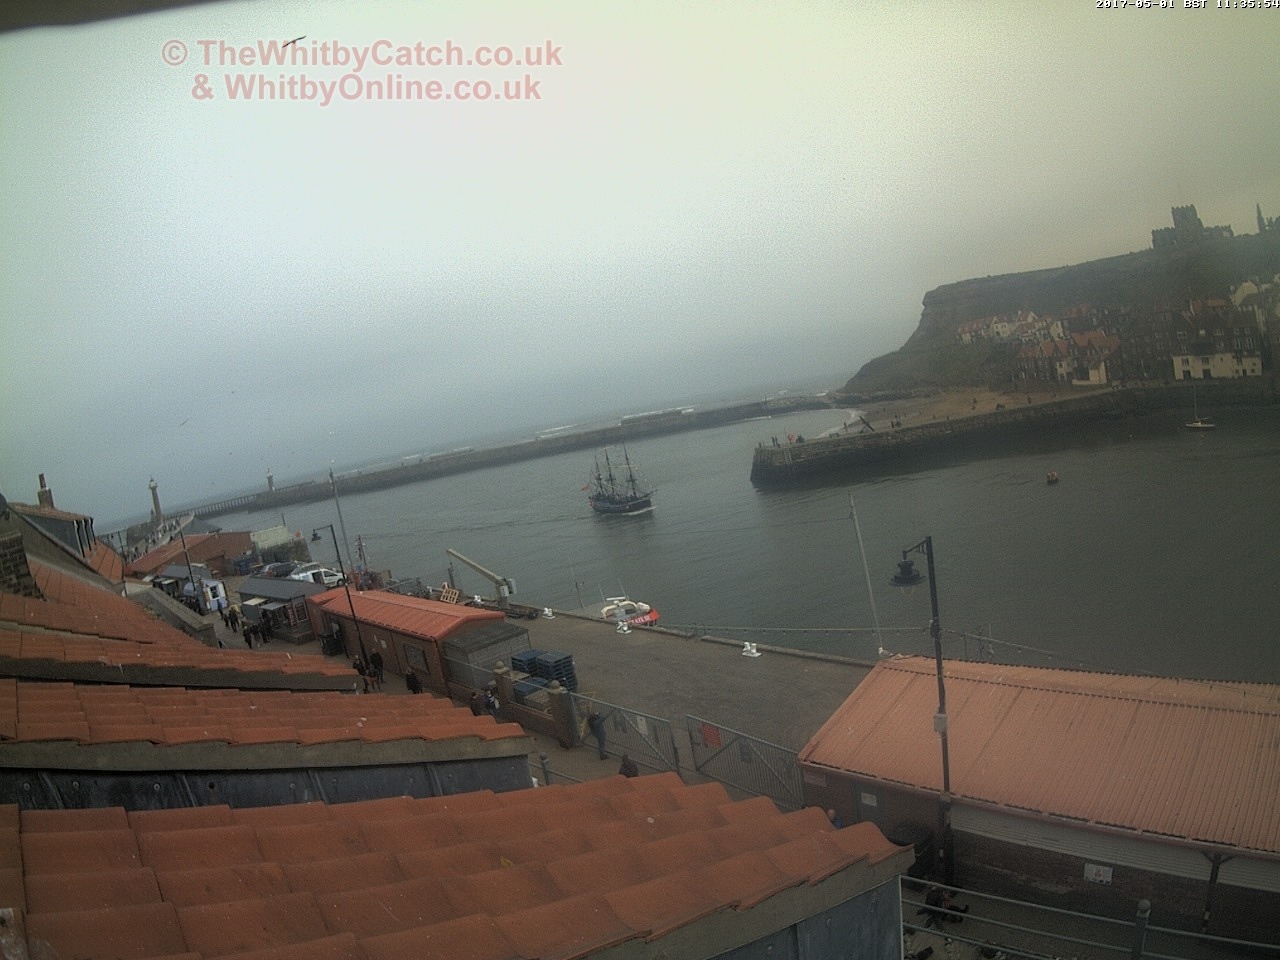 Whitby Mon 1st May 2017 11:36.